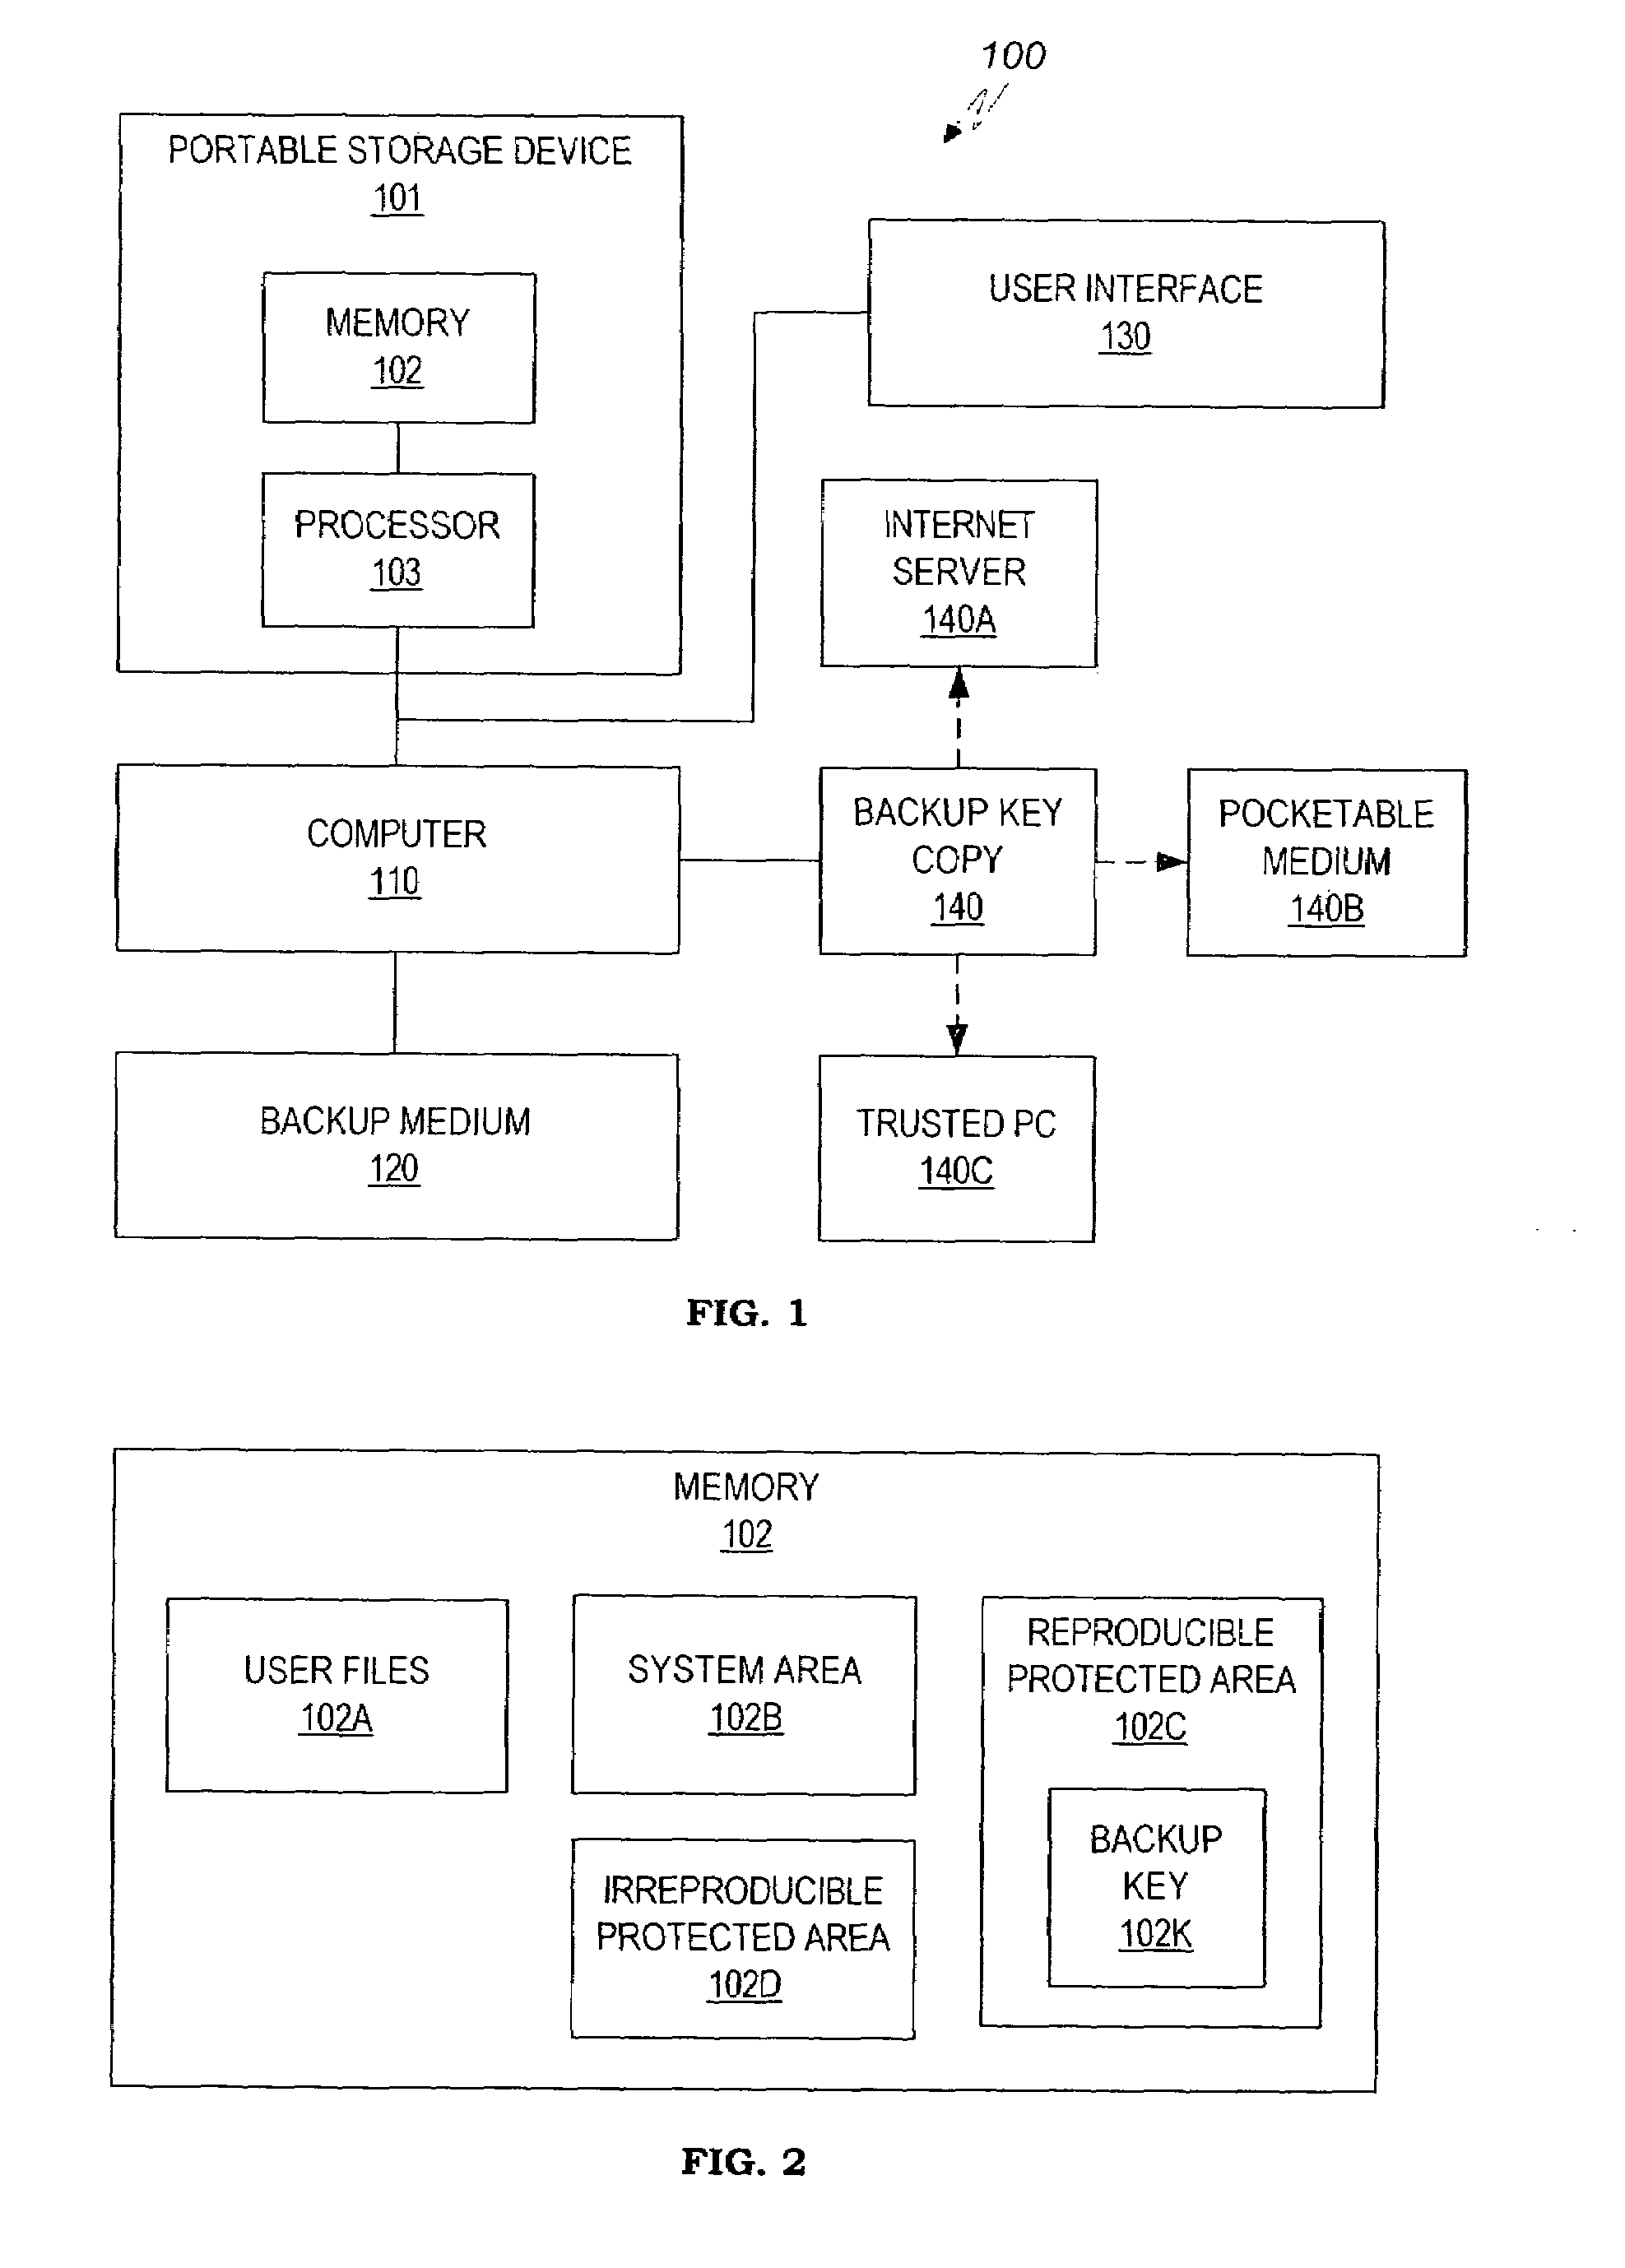 Method and system for maintaining backup of portable storage devices